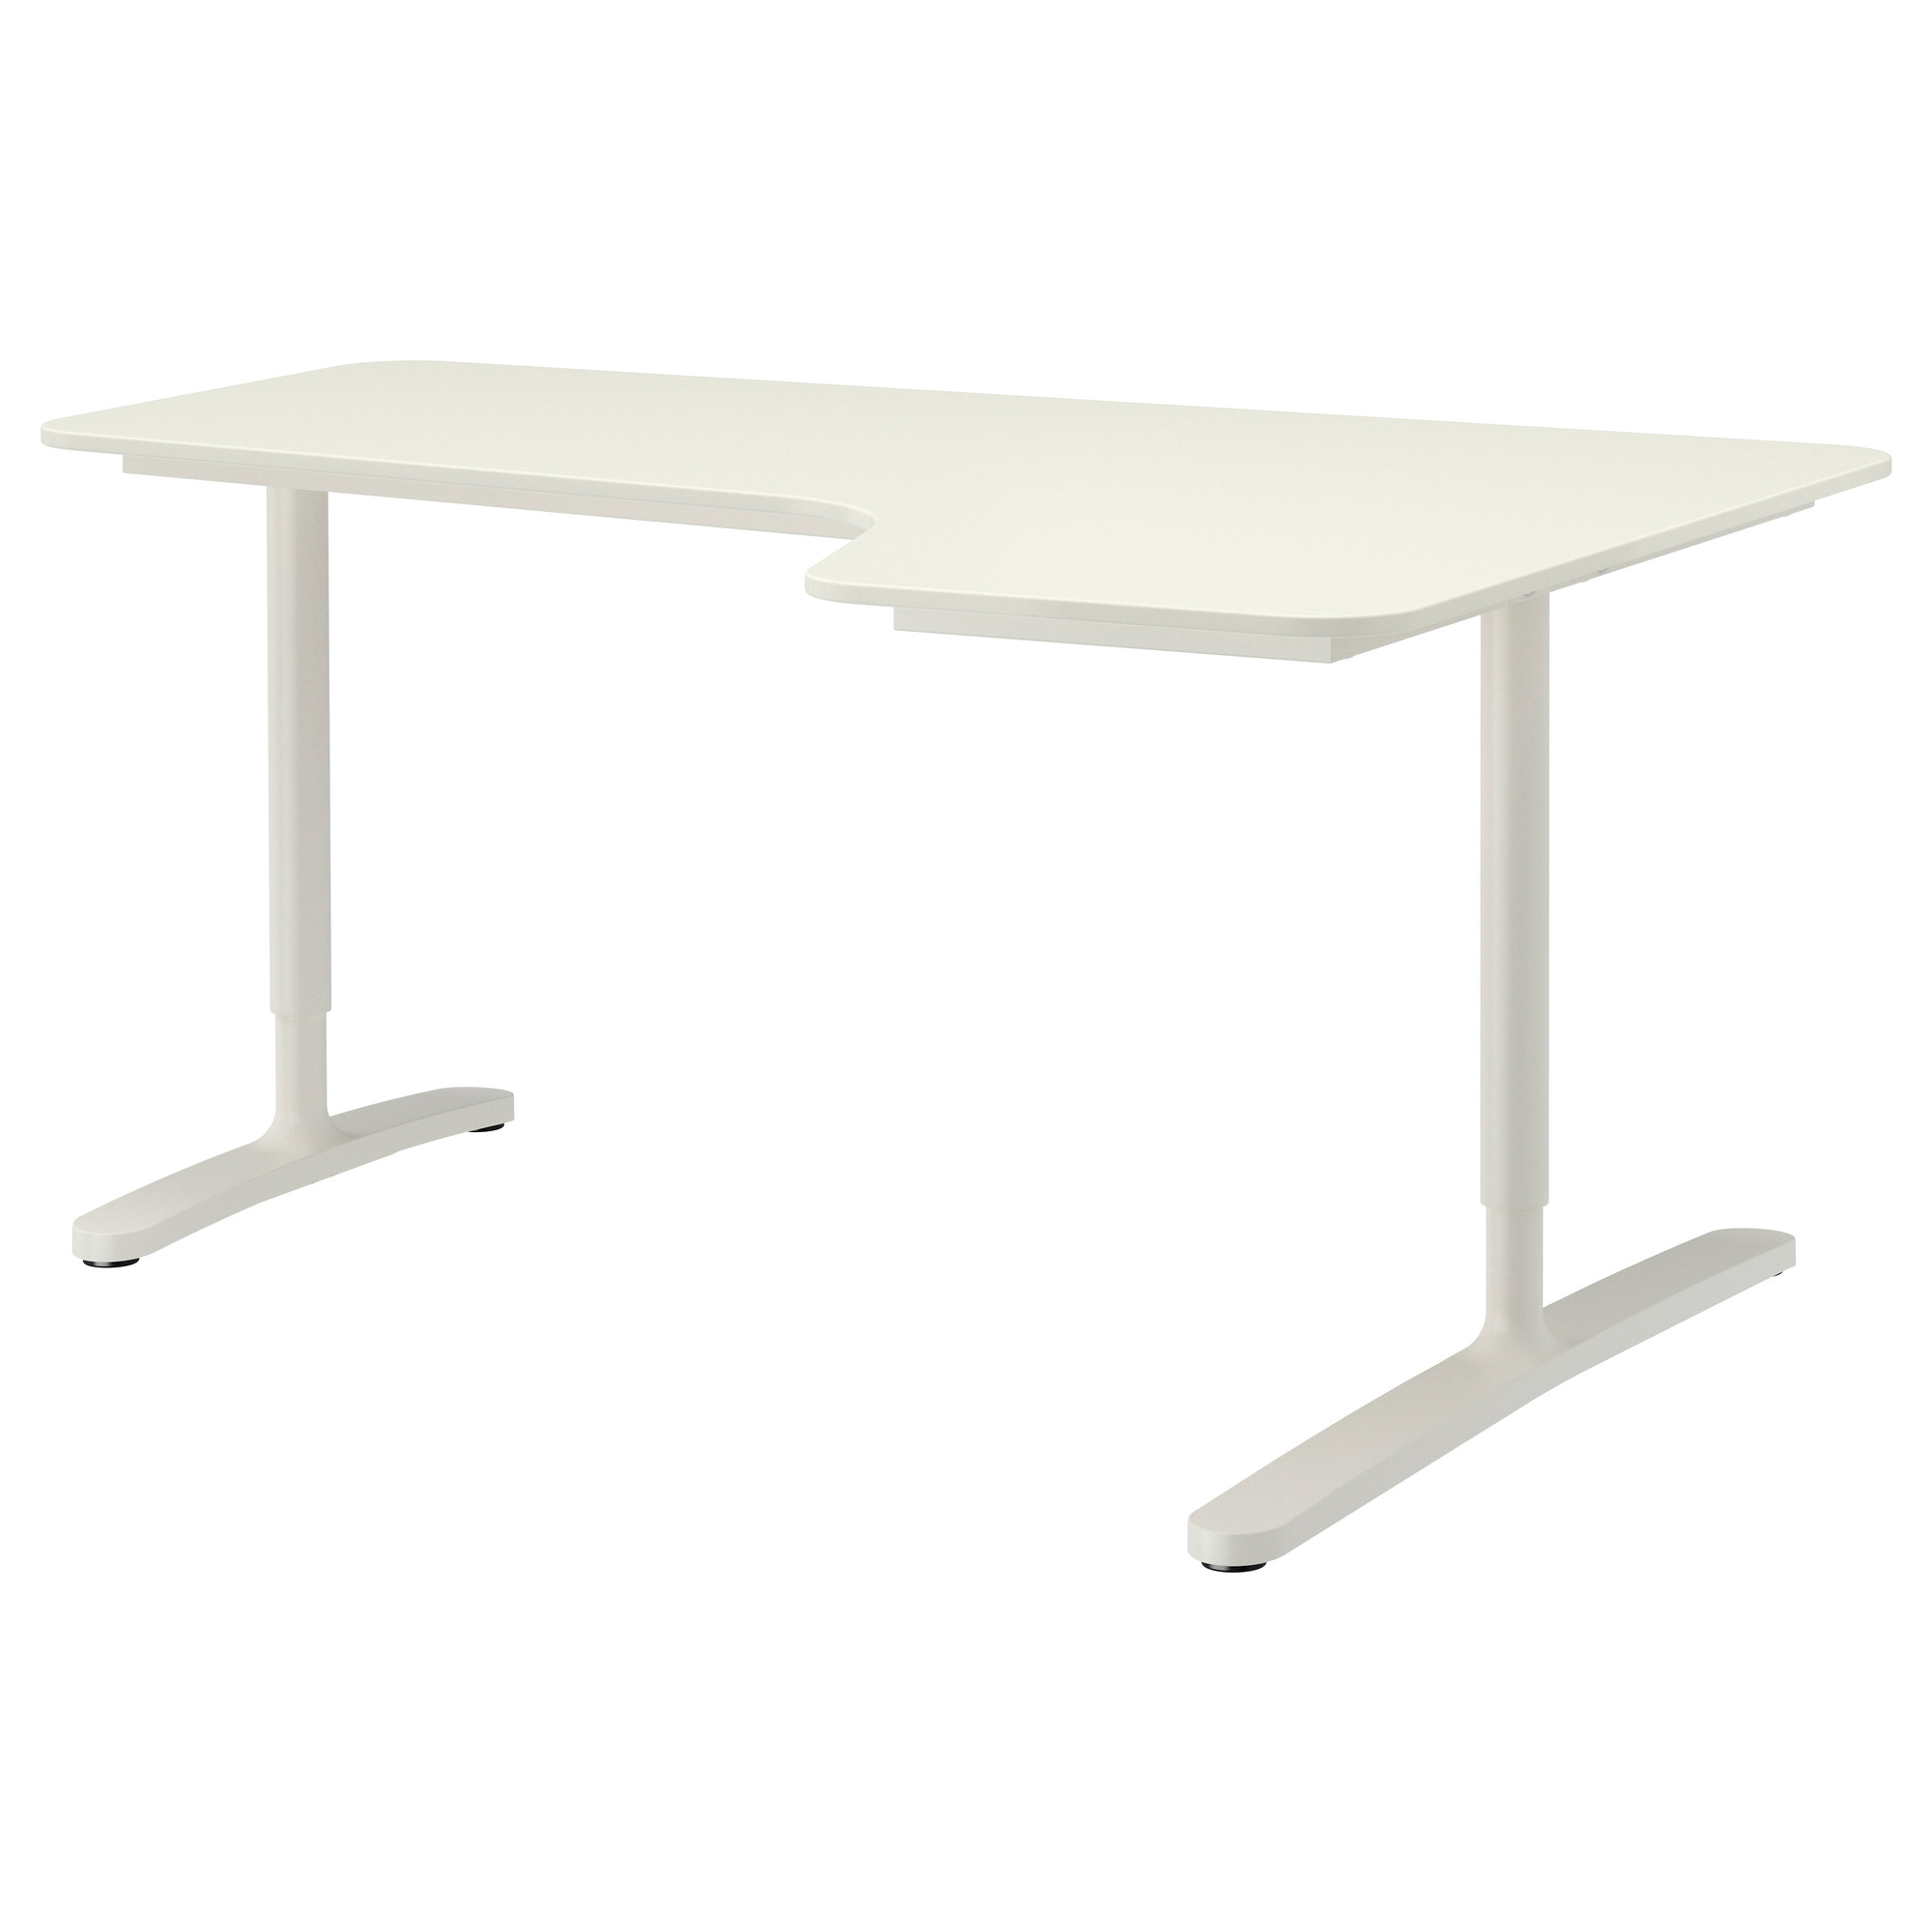 59222532 MOSHULT Office Tables IKEA khmer in phnom penh cambodia